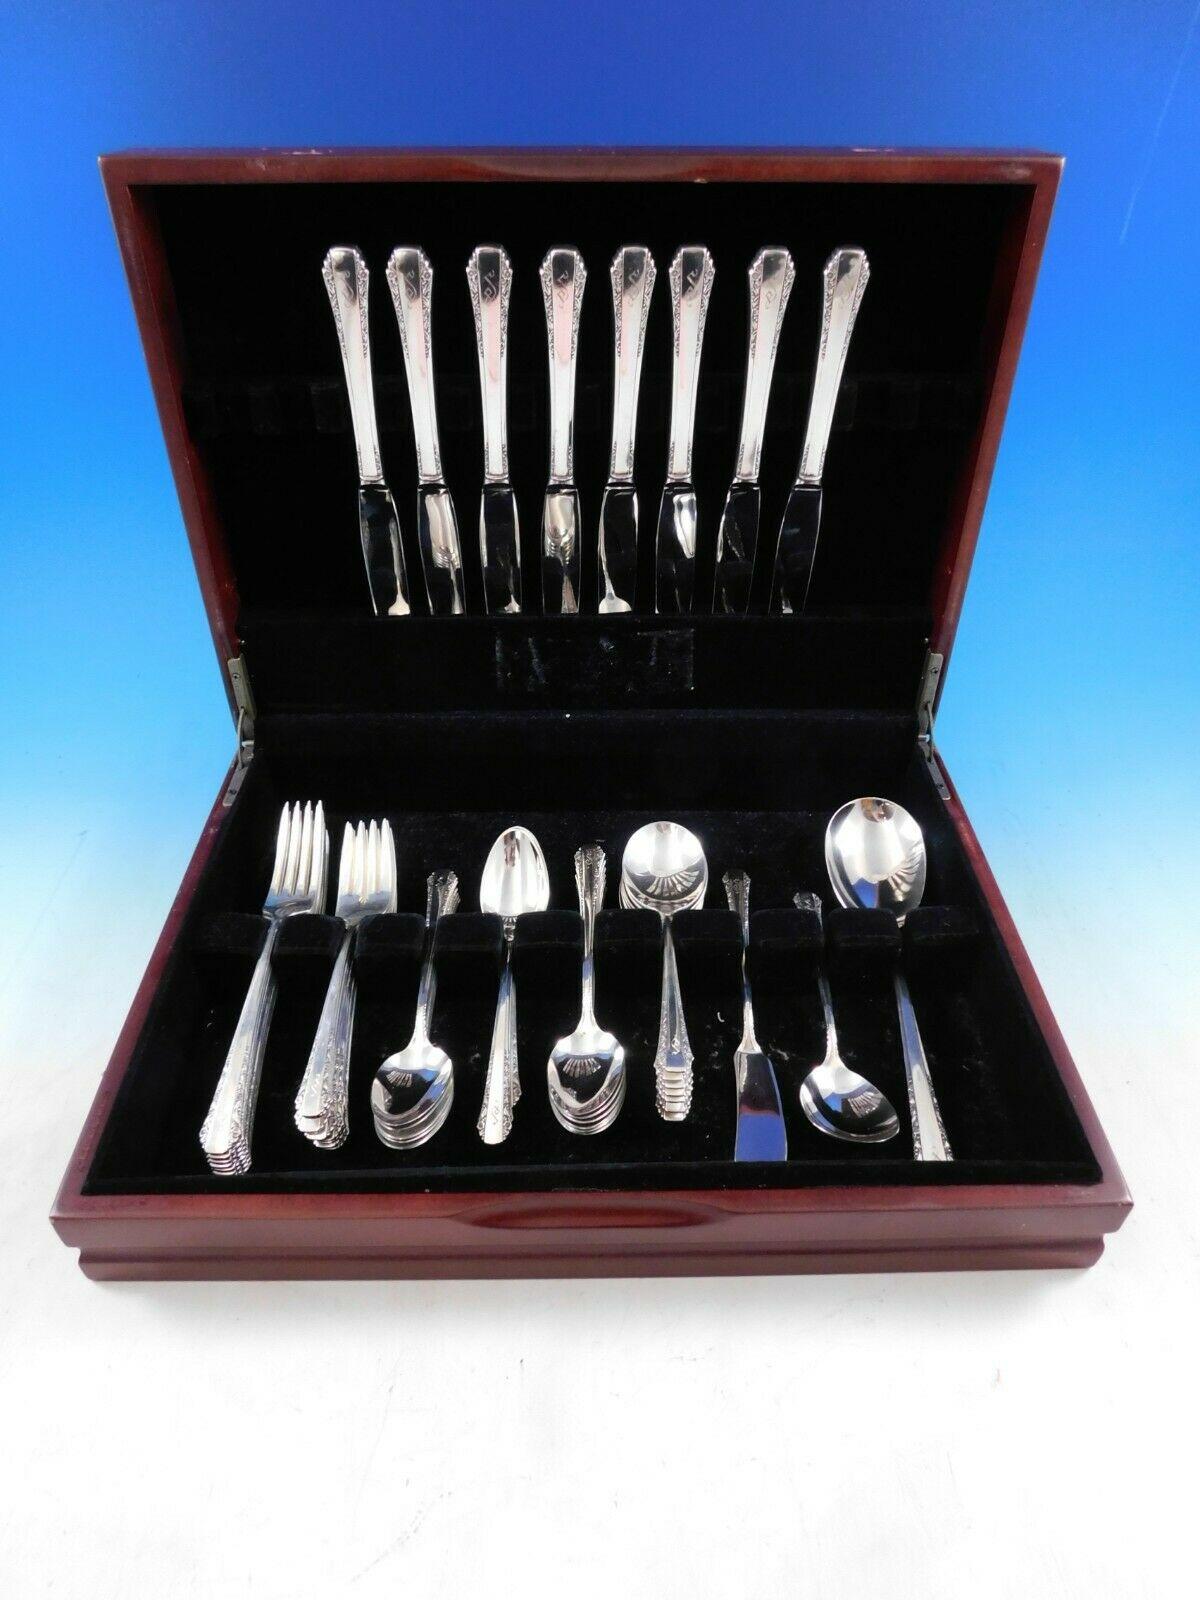 Ballad by Hallmark sterling silver flatware set, 51 pieces. This set includes:

8 Knives, 9 1/8
8 Forks, 7